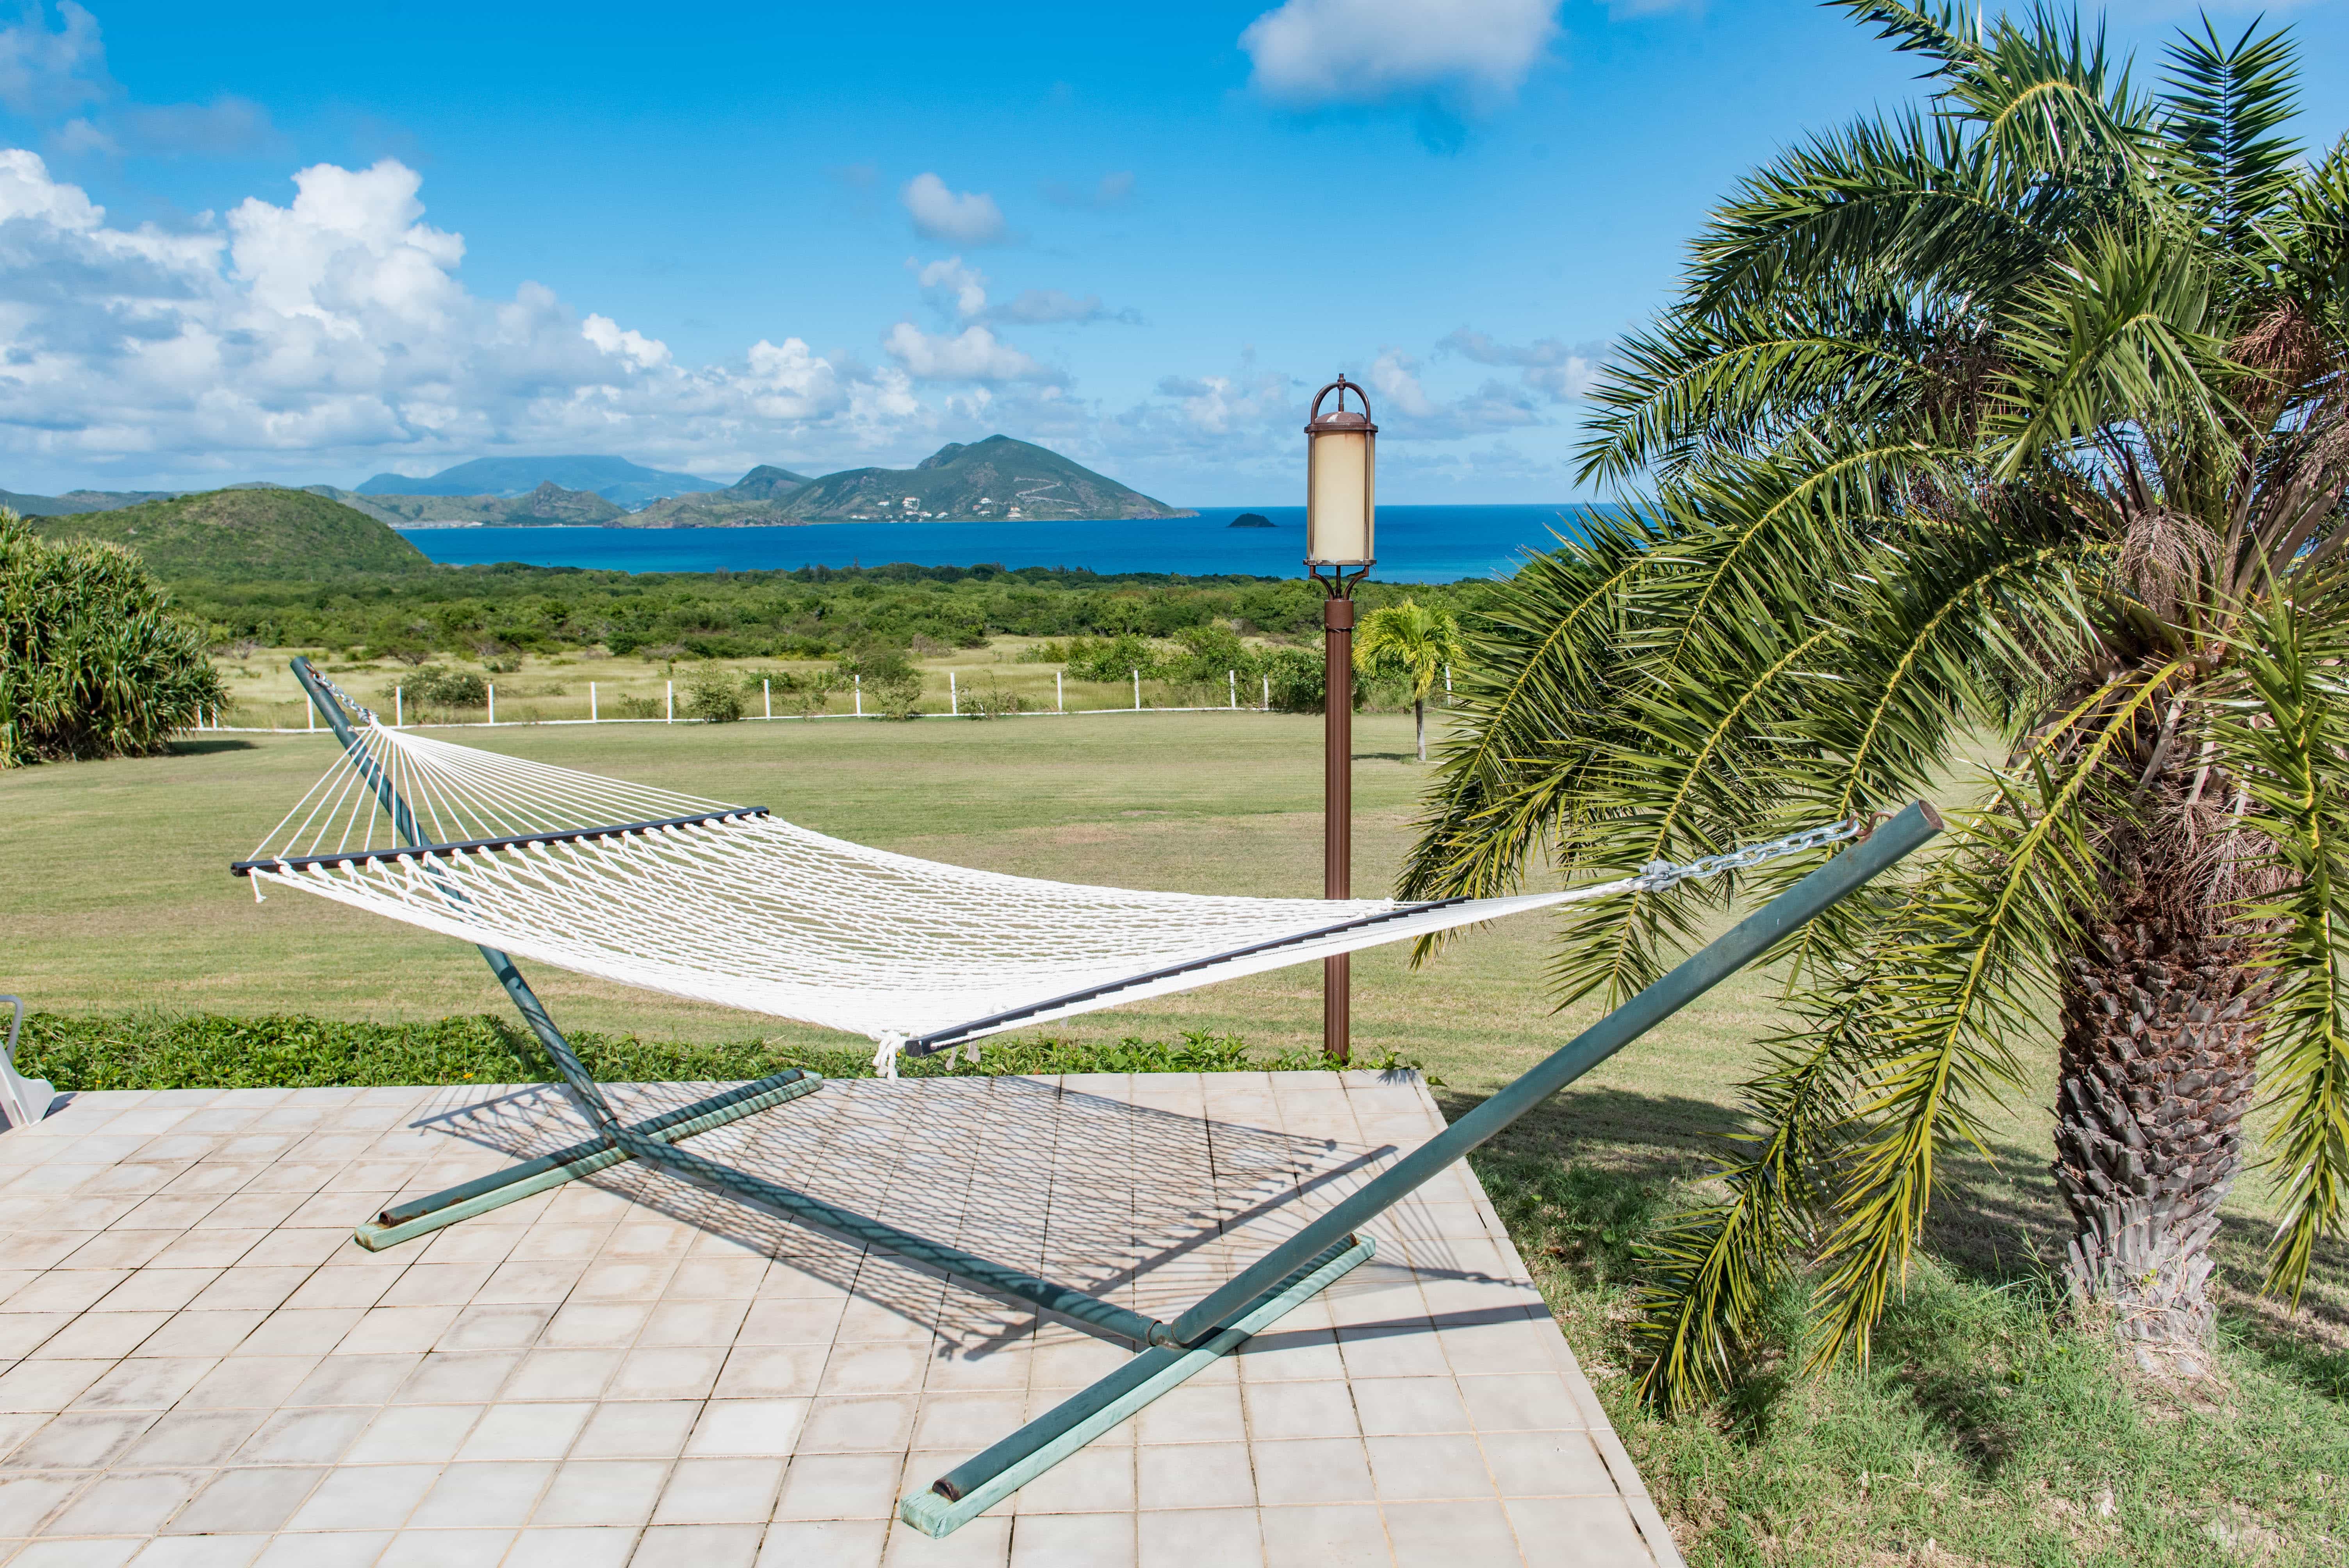 Go horizontal and bask in the glow of the Nevis Sun.